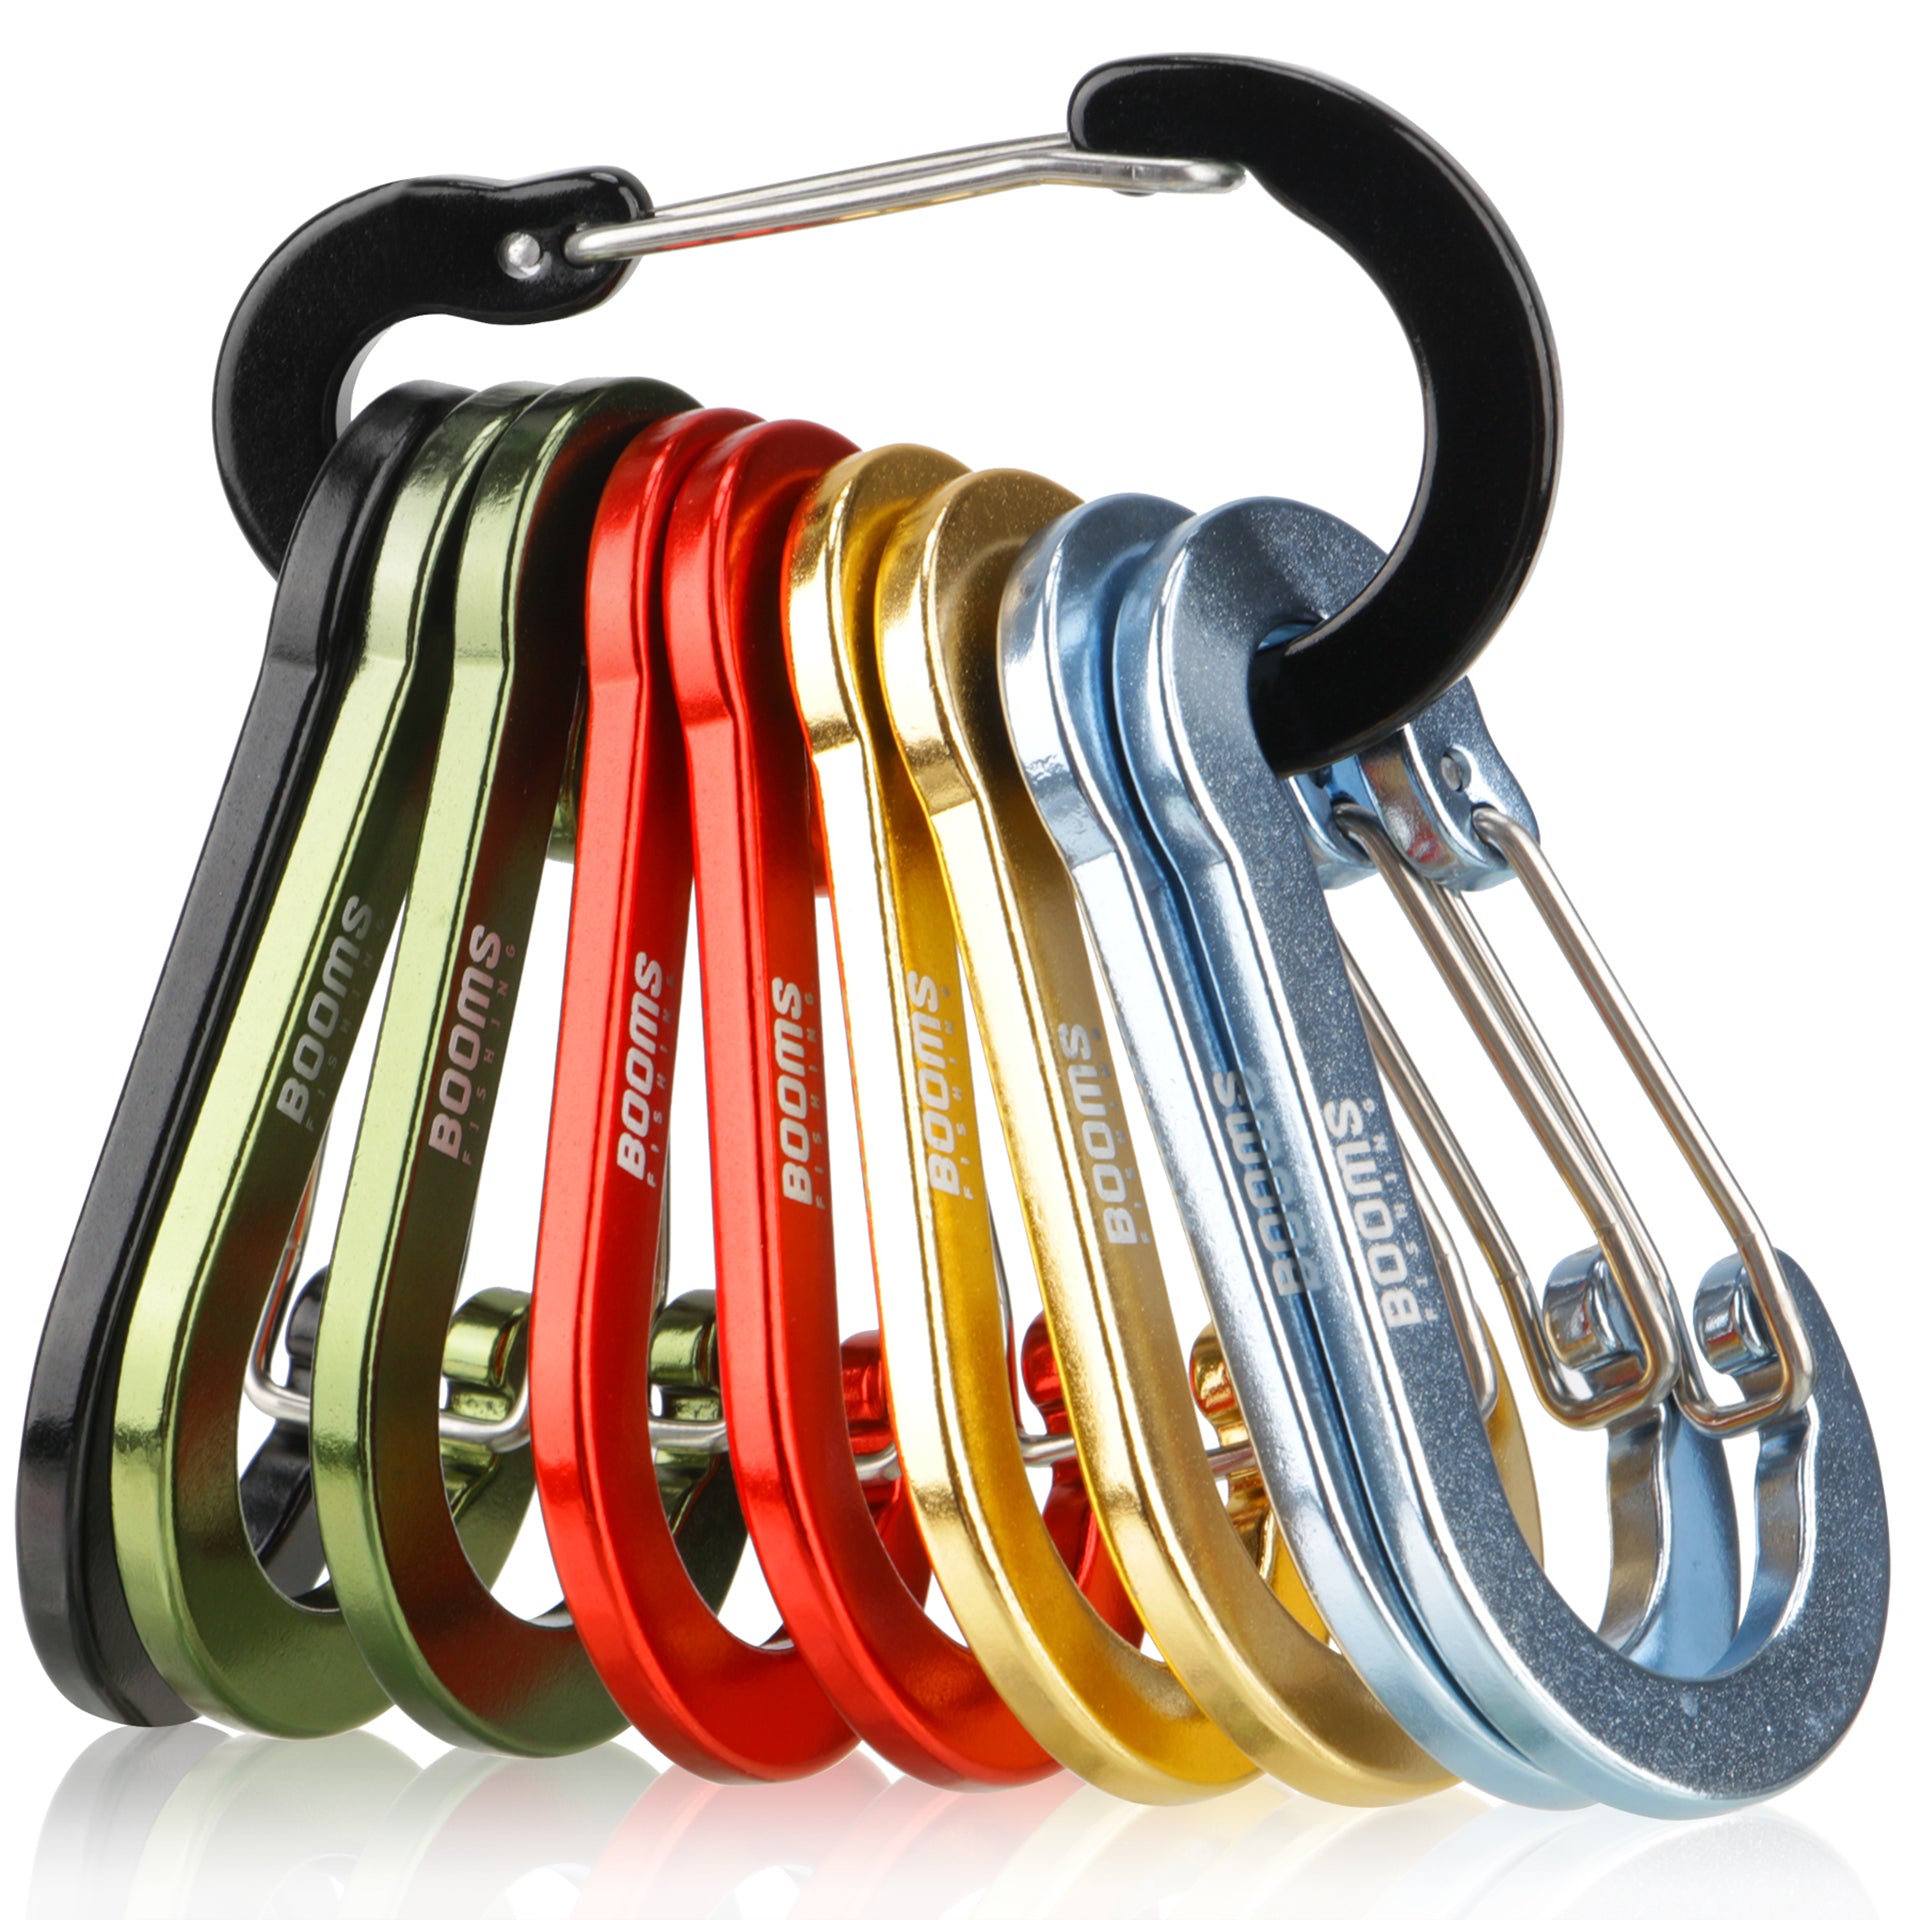 Booms Fishing CC5 Multi-Use Carabiner Clips, 10 Pack 2.7 Small